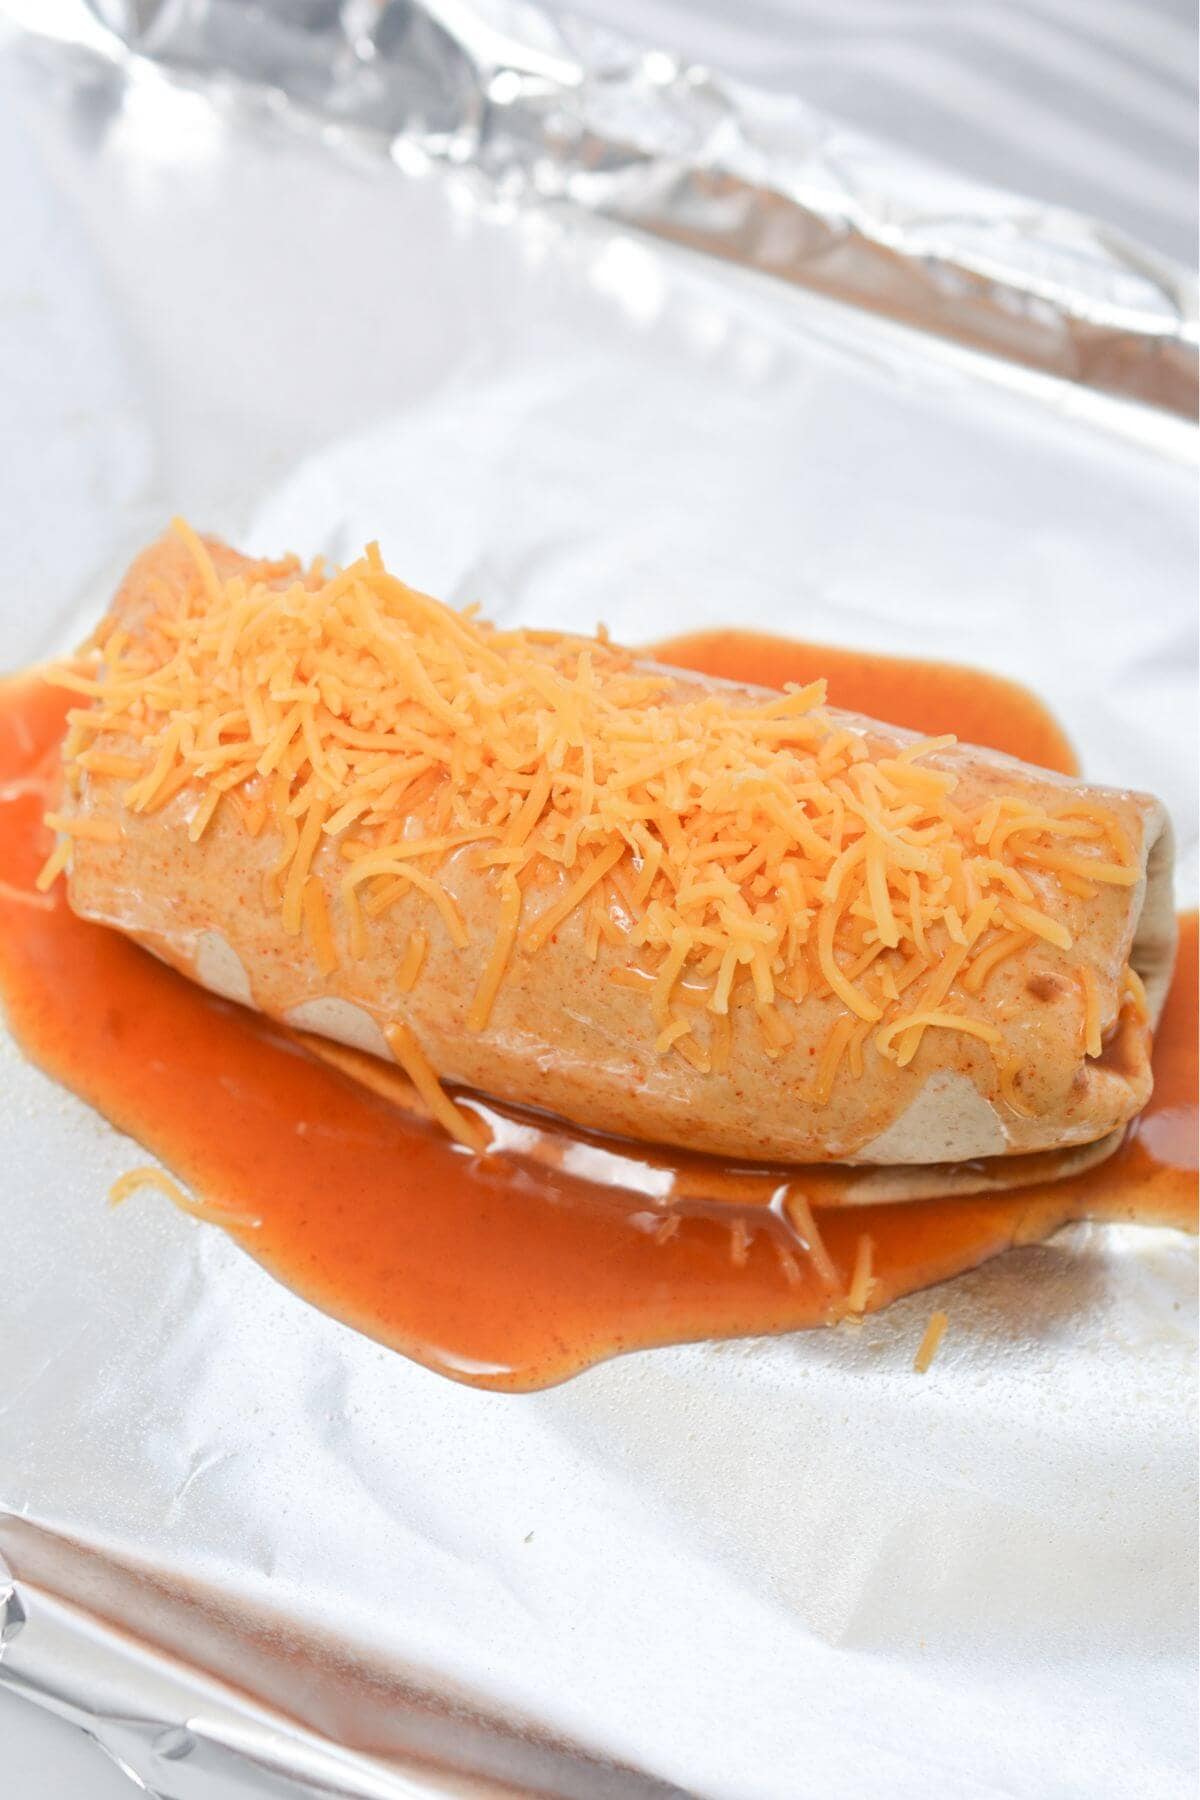 A burrito wrapped in foil with sauce and cheese.